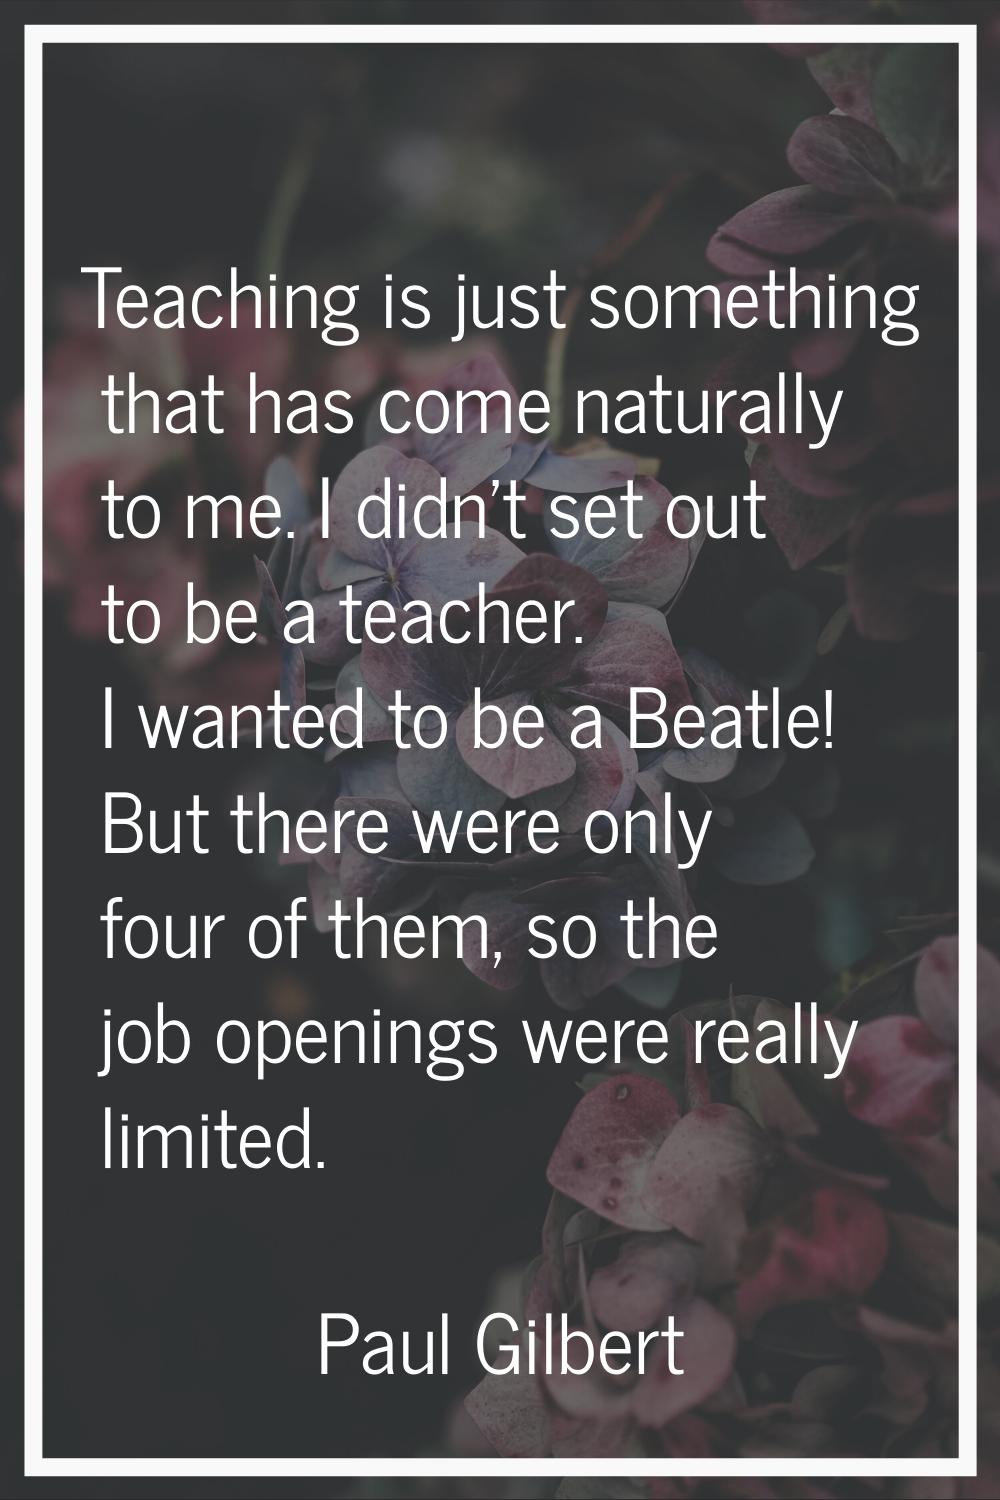 Teaching is just something that has come naturally to me. I didn't set out to be a teacher. I wante